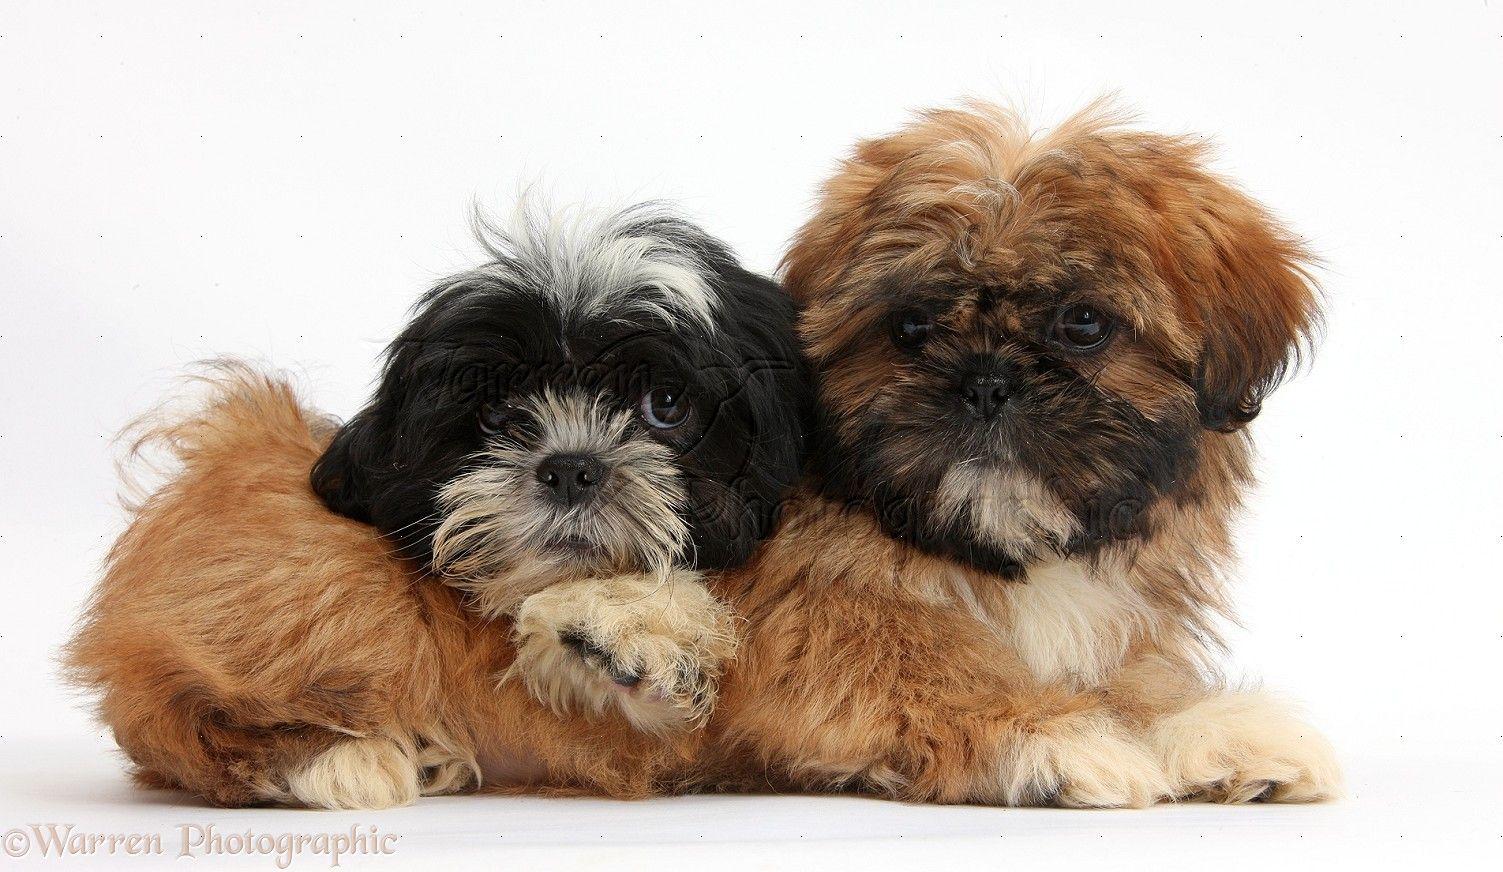 Dogs: Brown And Black And White Shih Tzu Puppies Photo WP38315